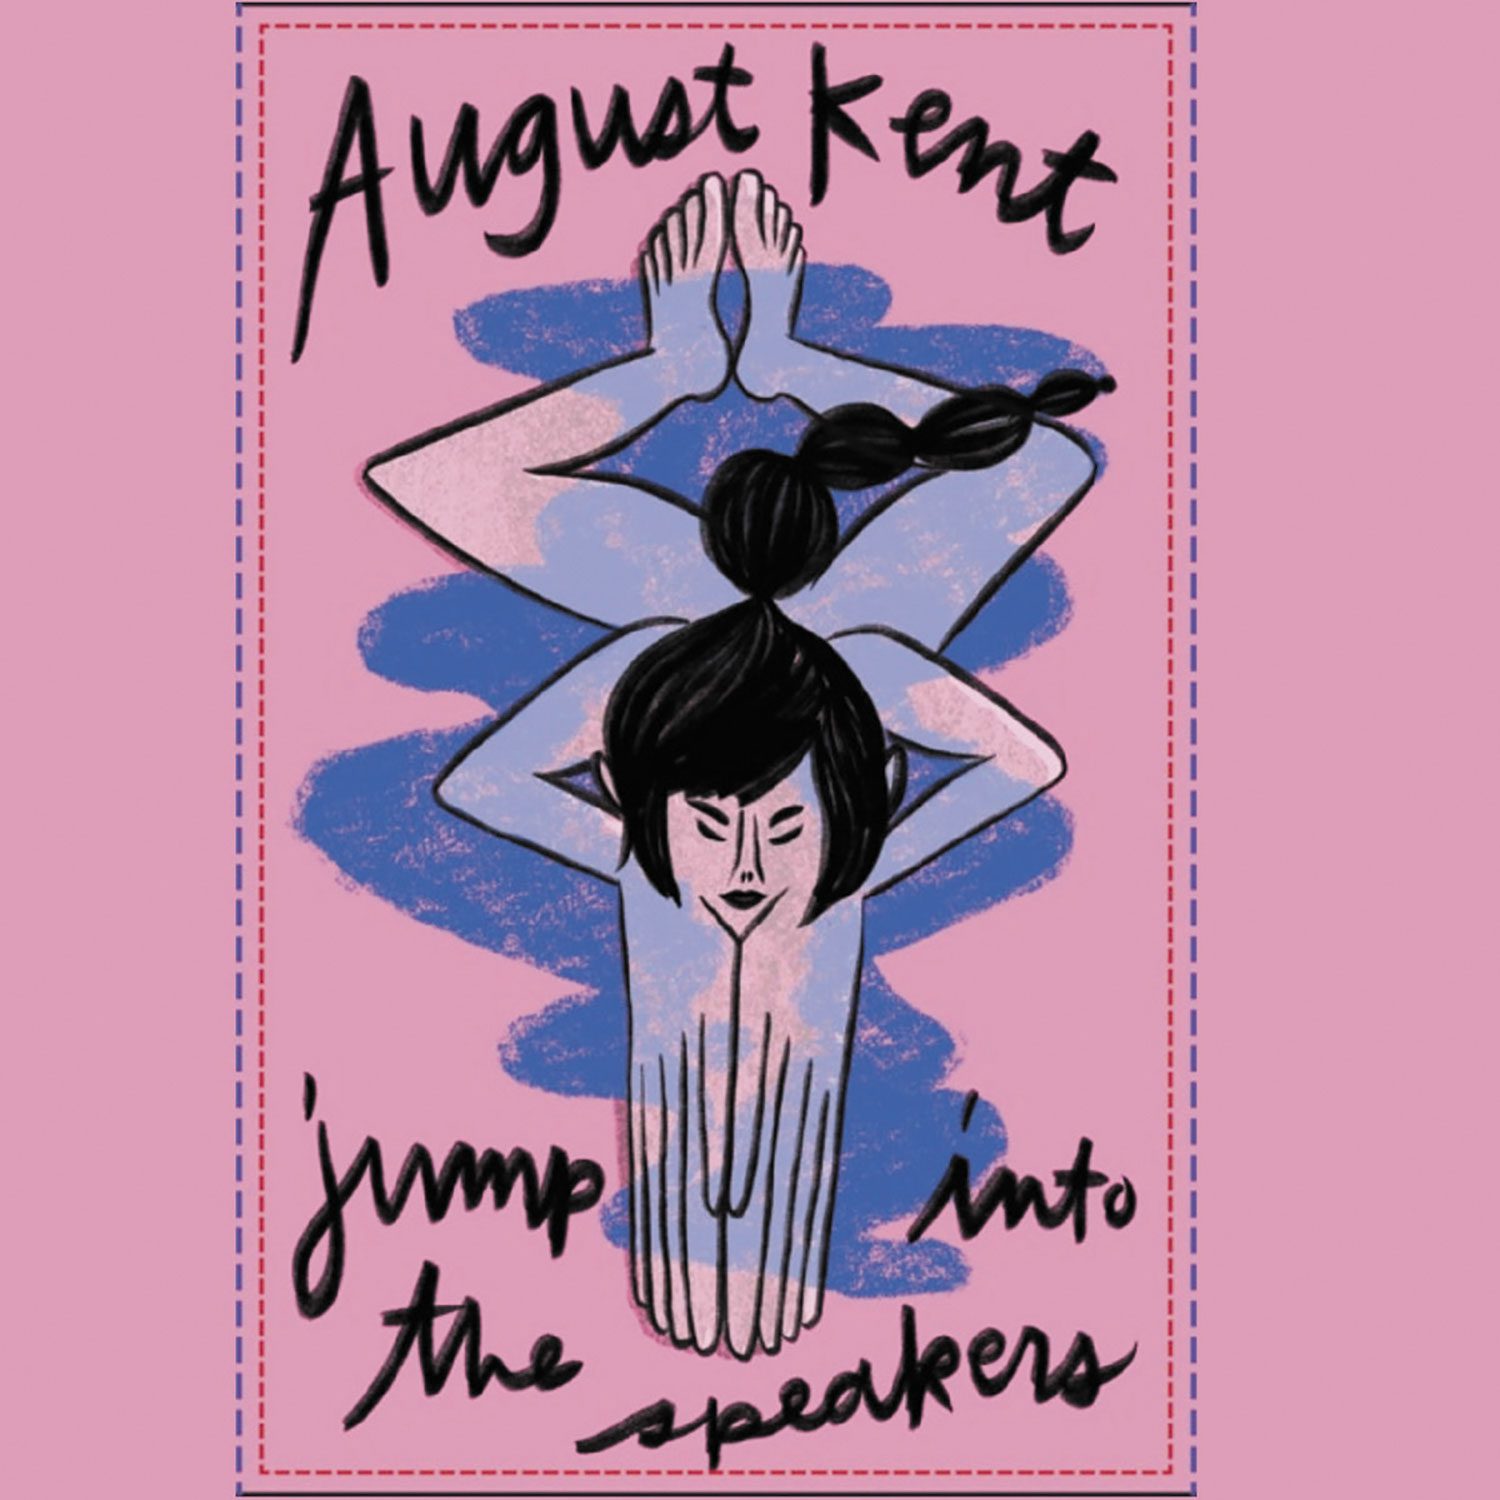 Jump Into The Speakers album by August Kent